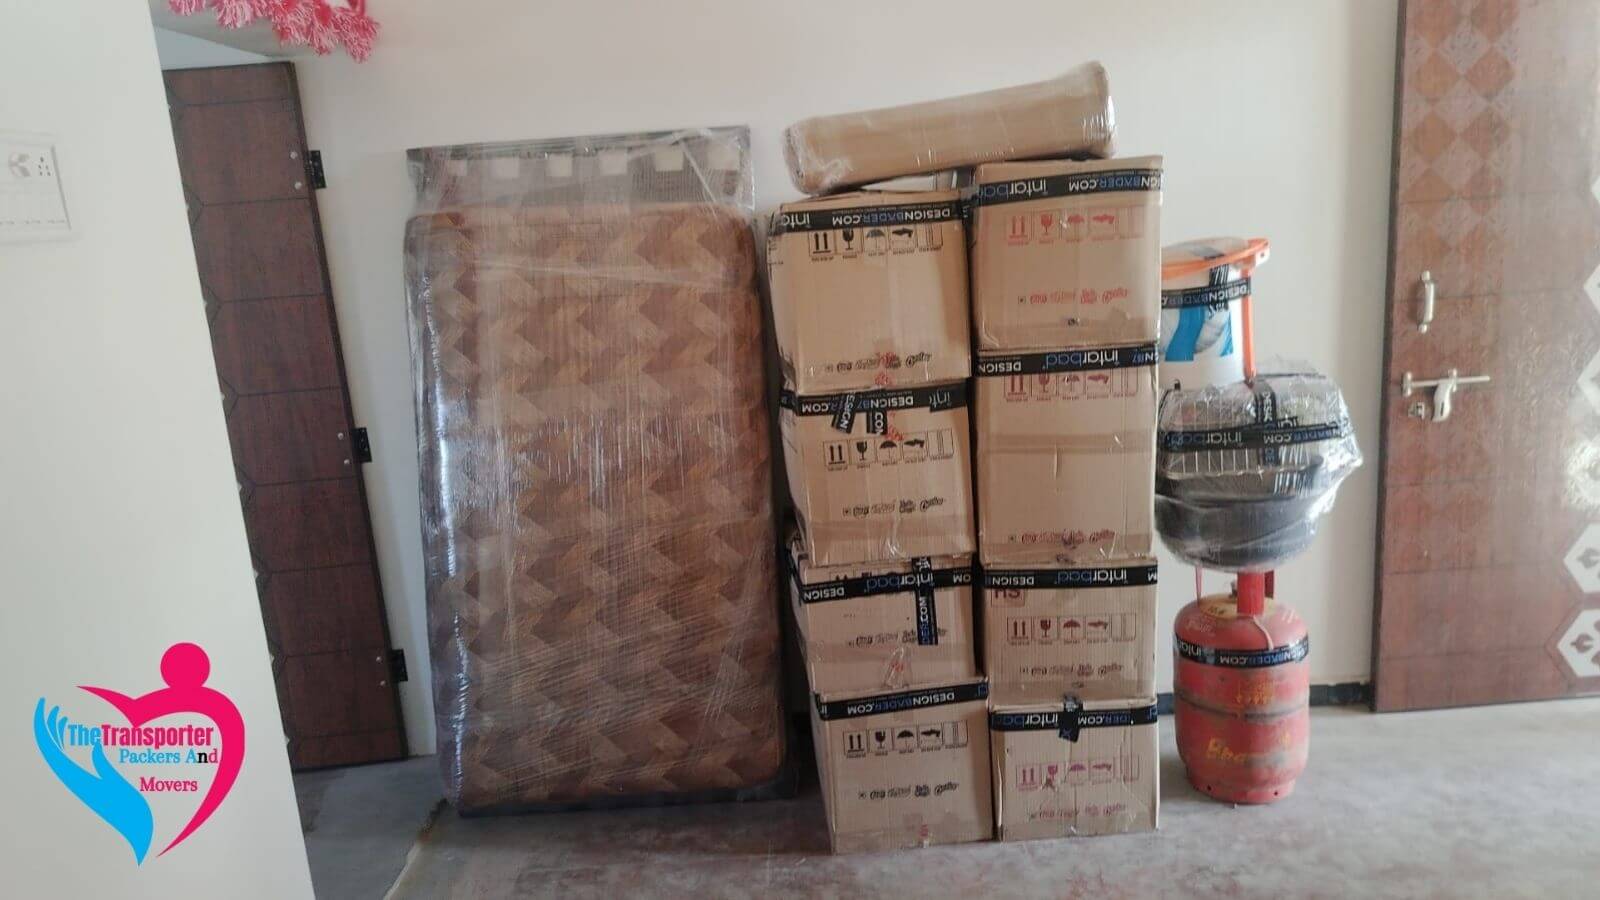 TheTransporter Packers and Movers in Nashik - Our Commitment to You